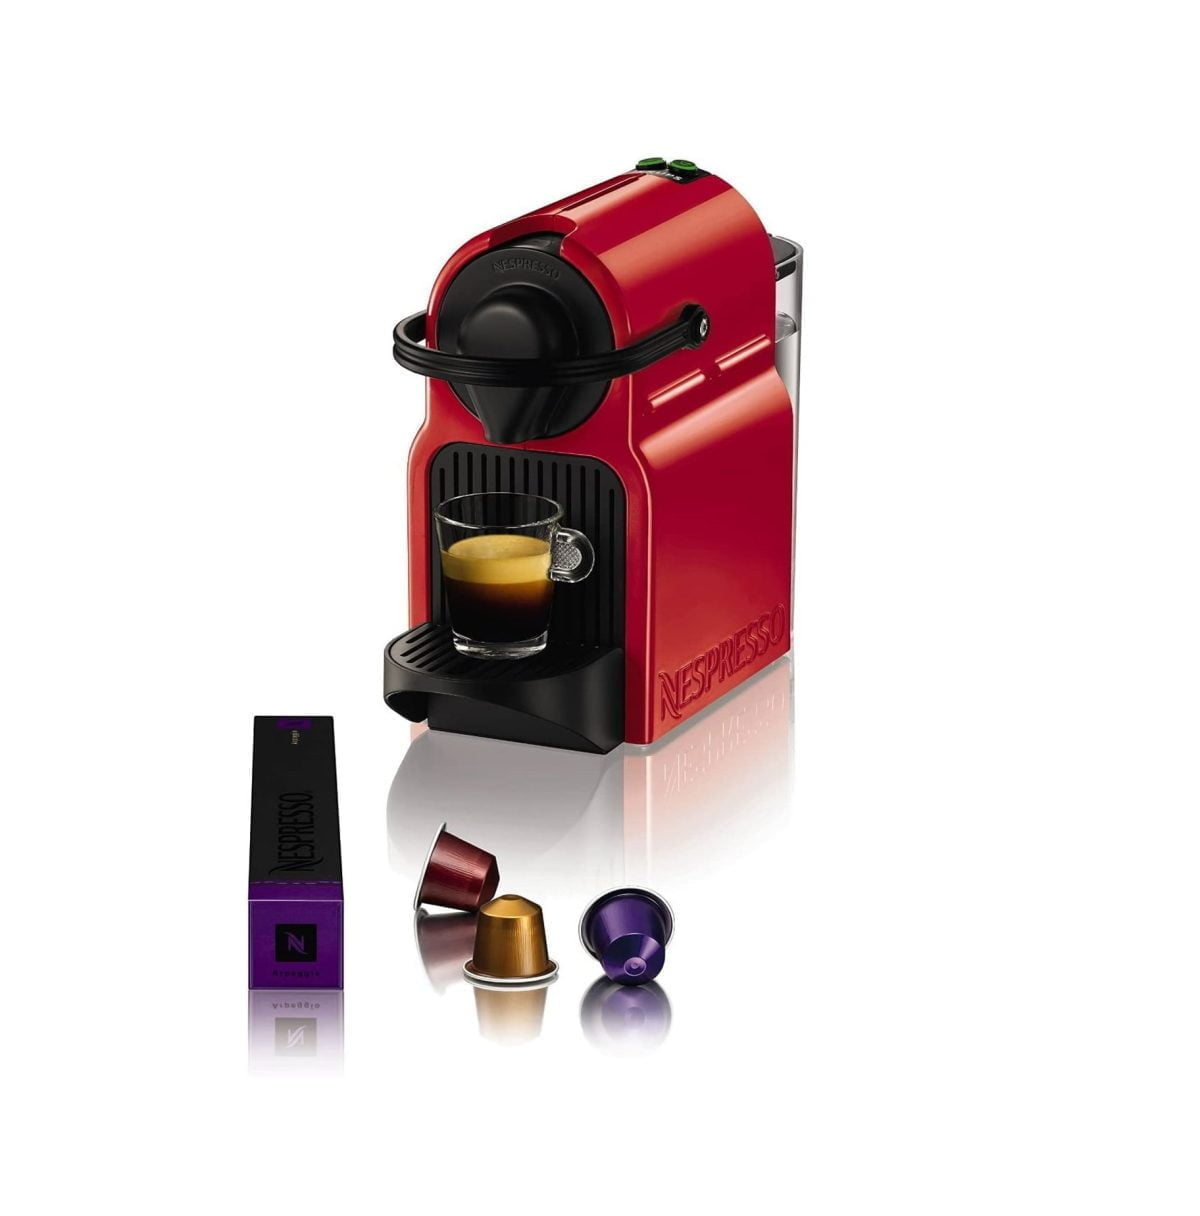 71W6Tbmjk1L. Ac Sl1500 1 Nespresso &Lt;Div Class=&Quot;Product Attribute Prod-Desc-Stat1&Quot;&Gt; &Lt;Div Class=&Quot;Value&Quot;&Gt; &Lt;H1&Gt;Nespresso Inissia Ruby Rouge Krups Xn 1005 - Red (With 14 Capsules)&Lt;/H1&Gt; Https://Www.youtube.com/Watch?V=Lvwyyke8Onu &Lt;Strong&Gt;Efficient&Lt;/Strong&Gt; Inissia Was Smartly Designed To Make Your Life Easier. It Thinks Of Everything From The Two Cup Sizes Settings To The Automatic Shut-Off After 9 Minutes. &Lt;/Div&Gt; &Lt;/Div&Gt; &Lt;Div Class=&Quot;Product Attribute Prod-Desc-Stat2&Quot;&Gt; &Lt;Div Class=&Quot;Value&Quot;&Gt; &Lt;Strong&Gt;Speed At Your Service! &Lt;/Strong&Gt;In Just One Touch And 25 Seconds, The Water Reaches The Ideal Temperature To Make Up To 9 Coffee Without Having To Refill The 0,7 L Tank. &Lt;/Div&Gt; &Lt;/Div&Gt; Nespresso Inissia Nespresso Inissia Ruby Rouge Krups Xn 1005 - Red (With 14 Capsules)